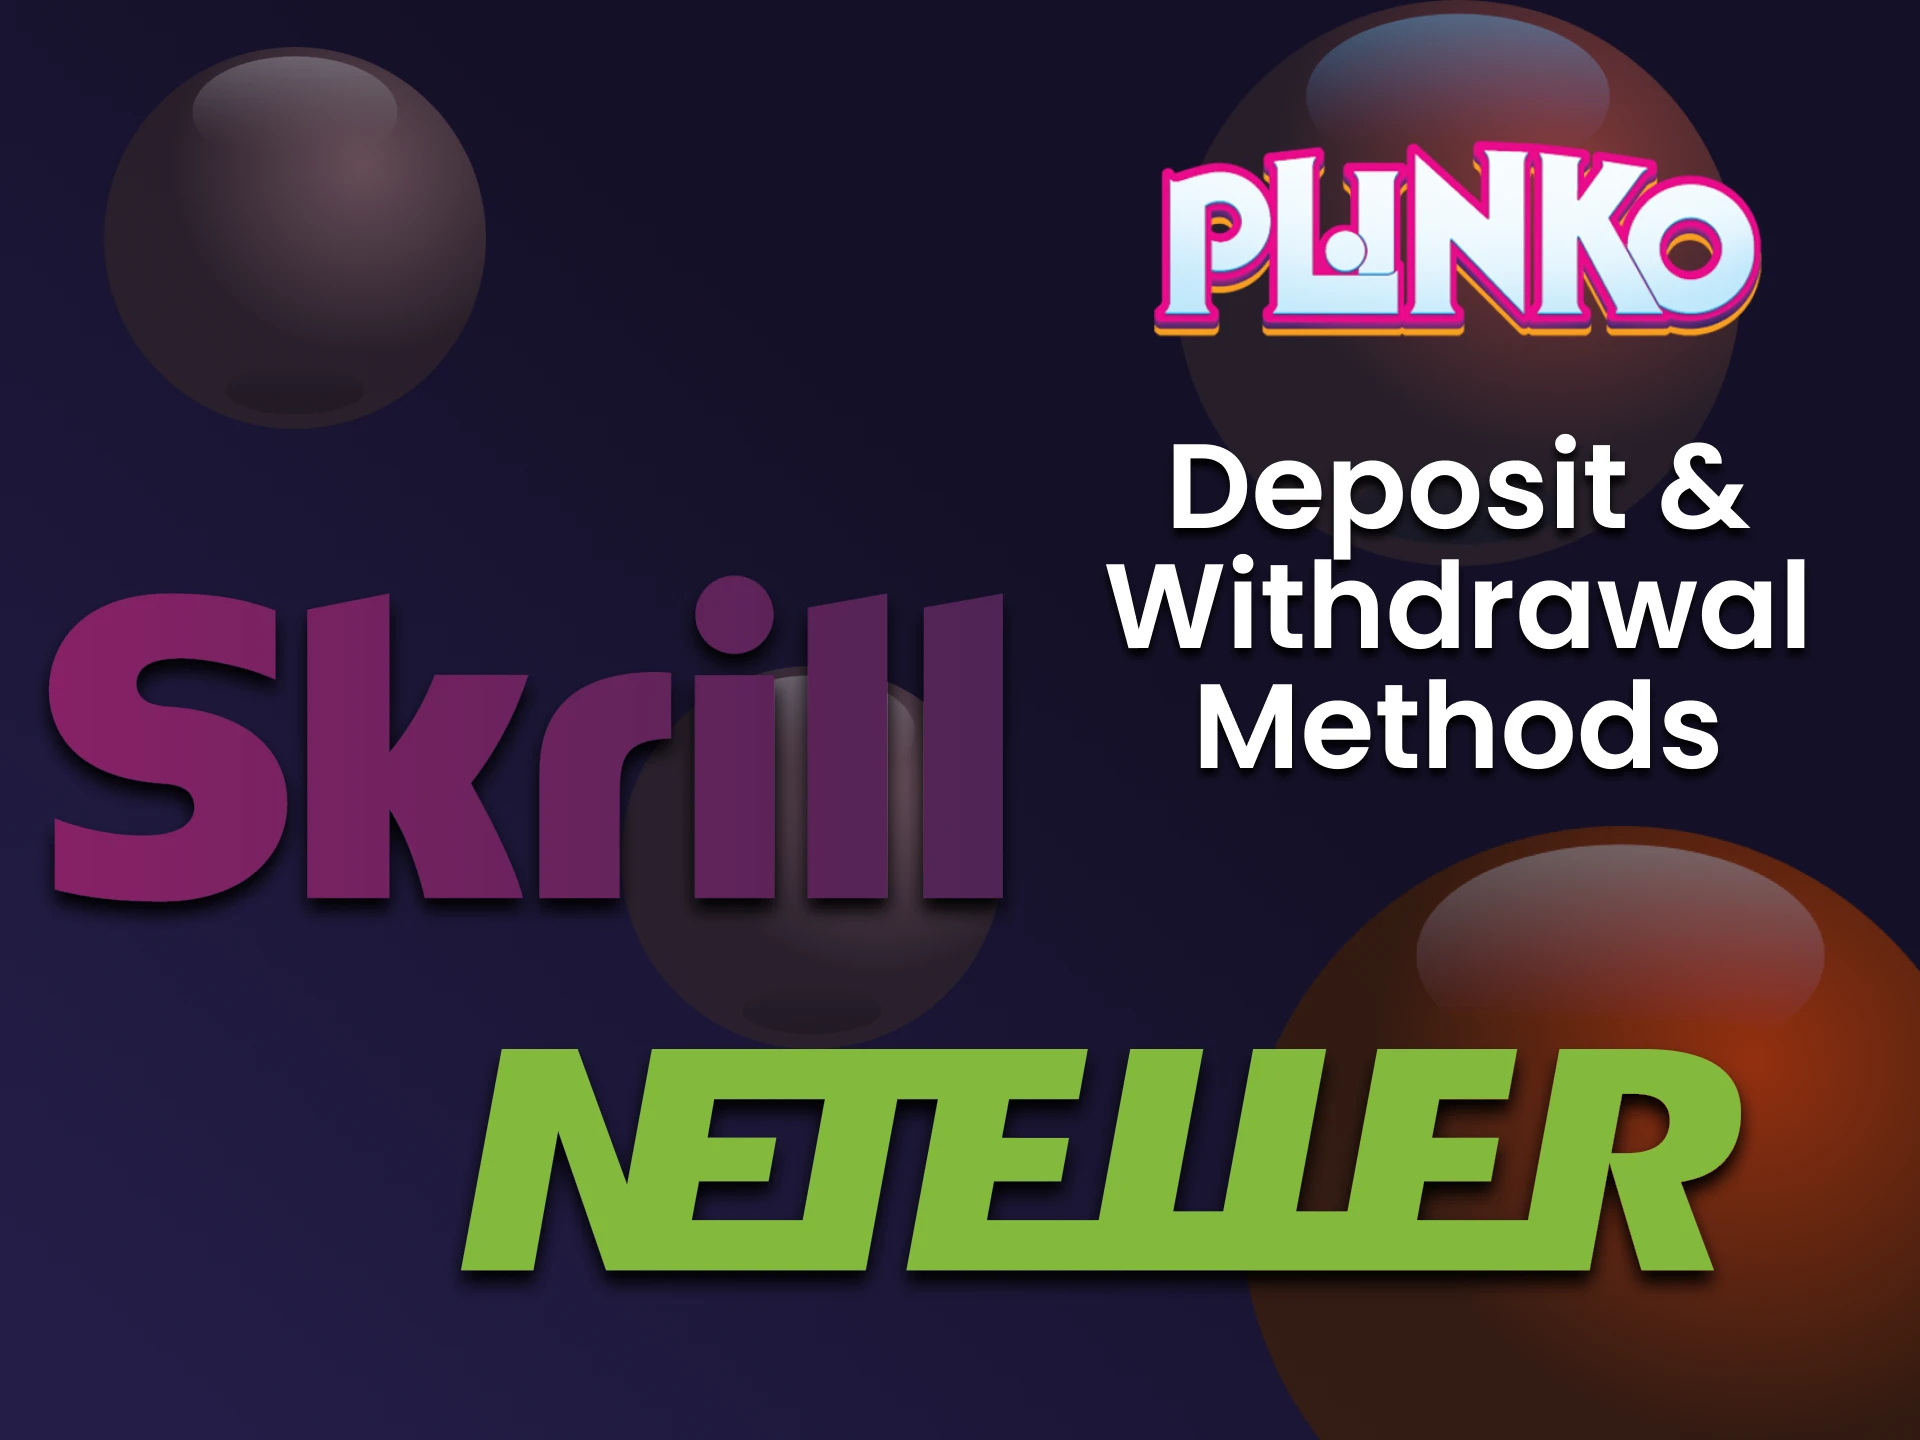 Find out the transaction methods for the Plinko game.